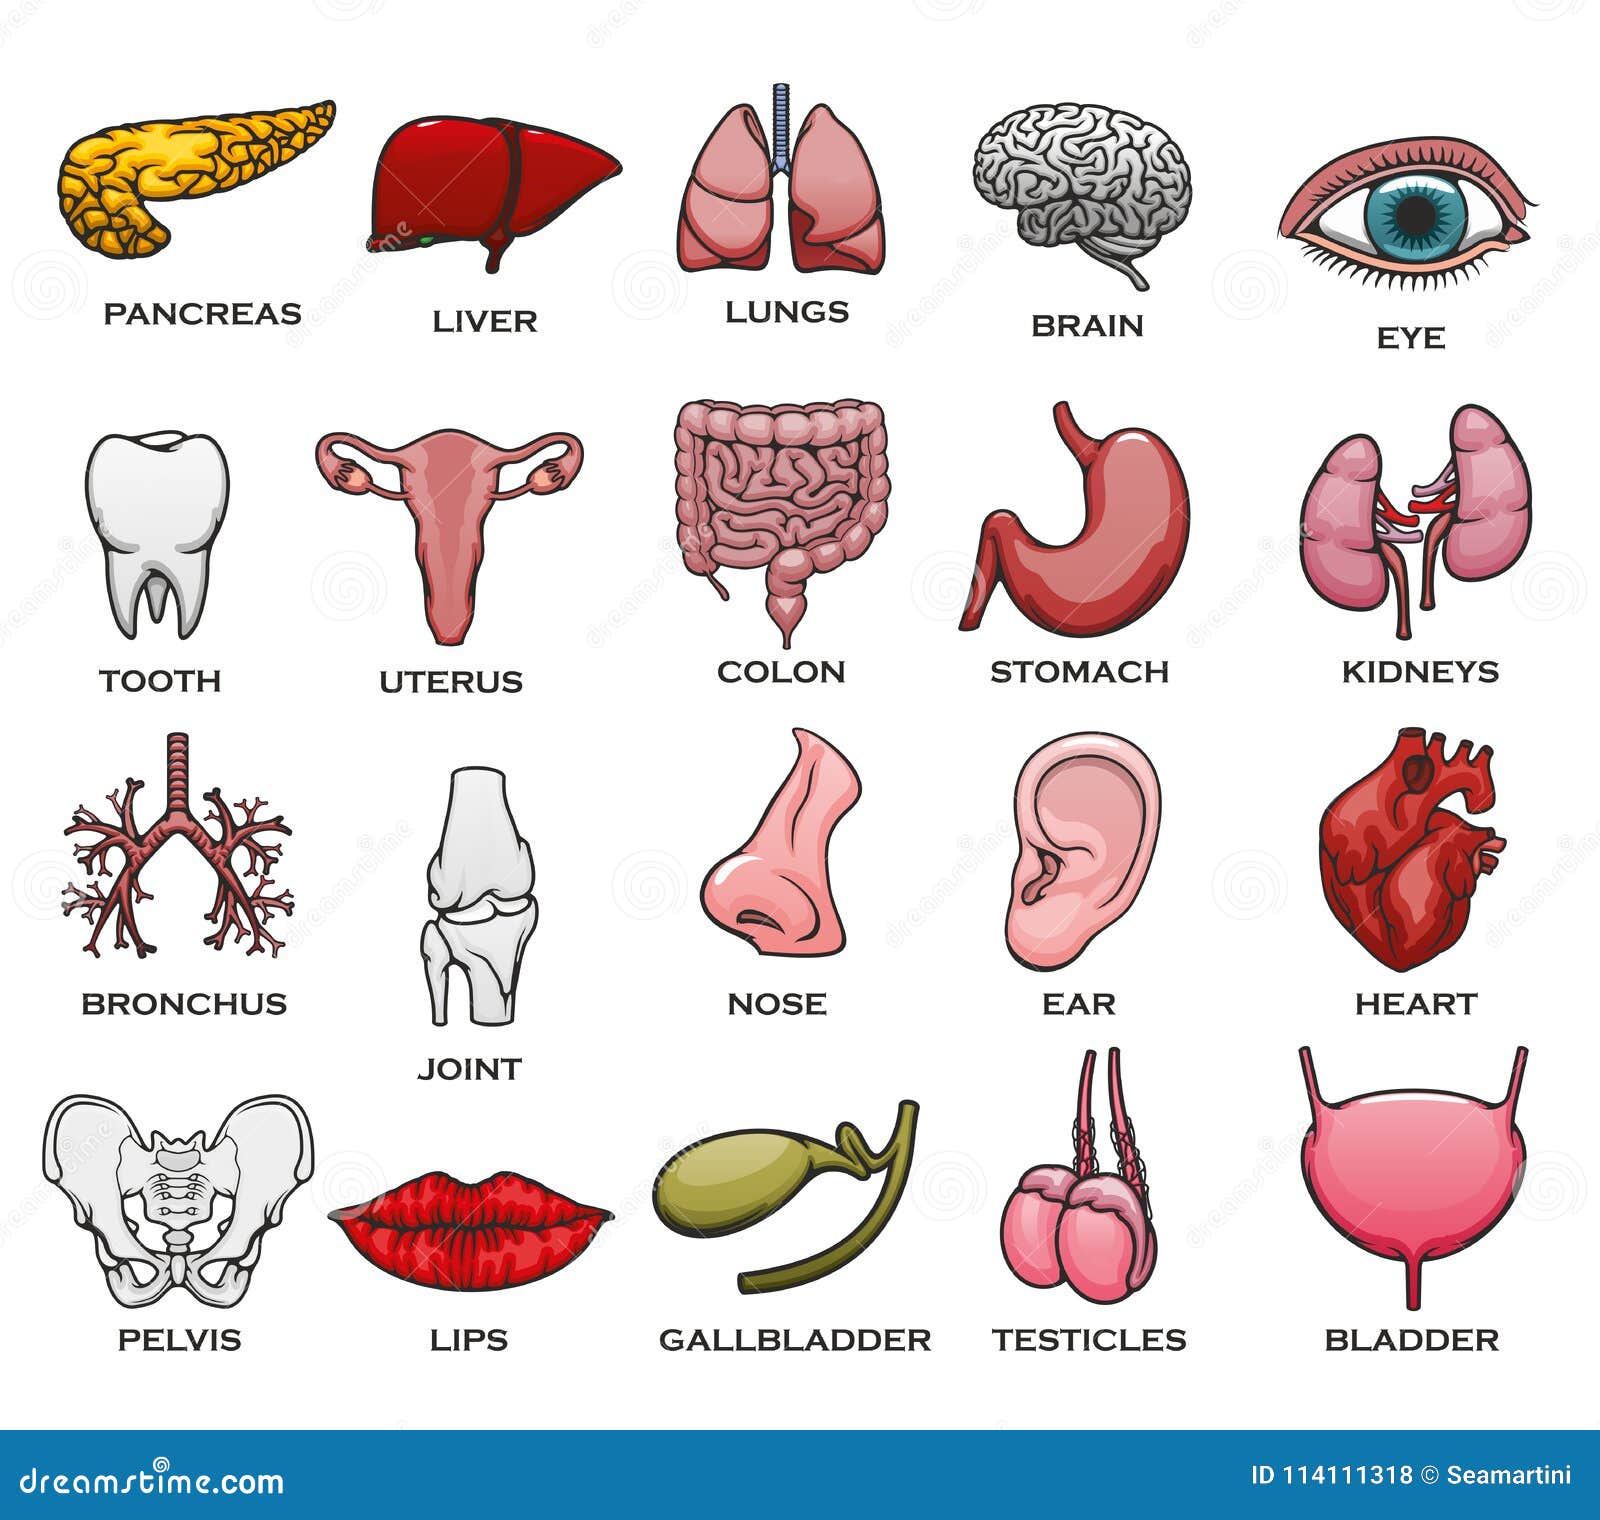 Human Body Parts Tamil And English - Body Parts Name In Tamil And